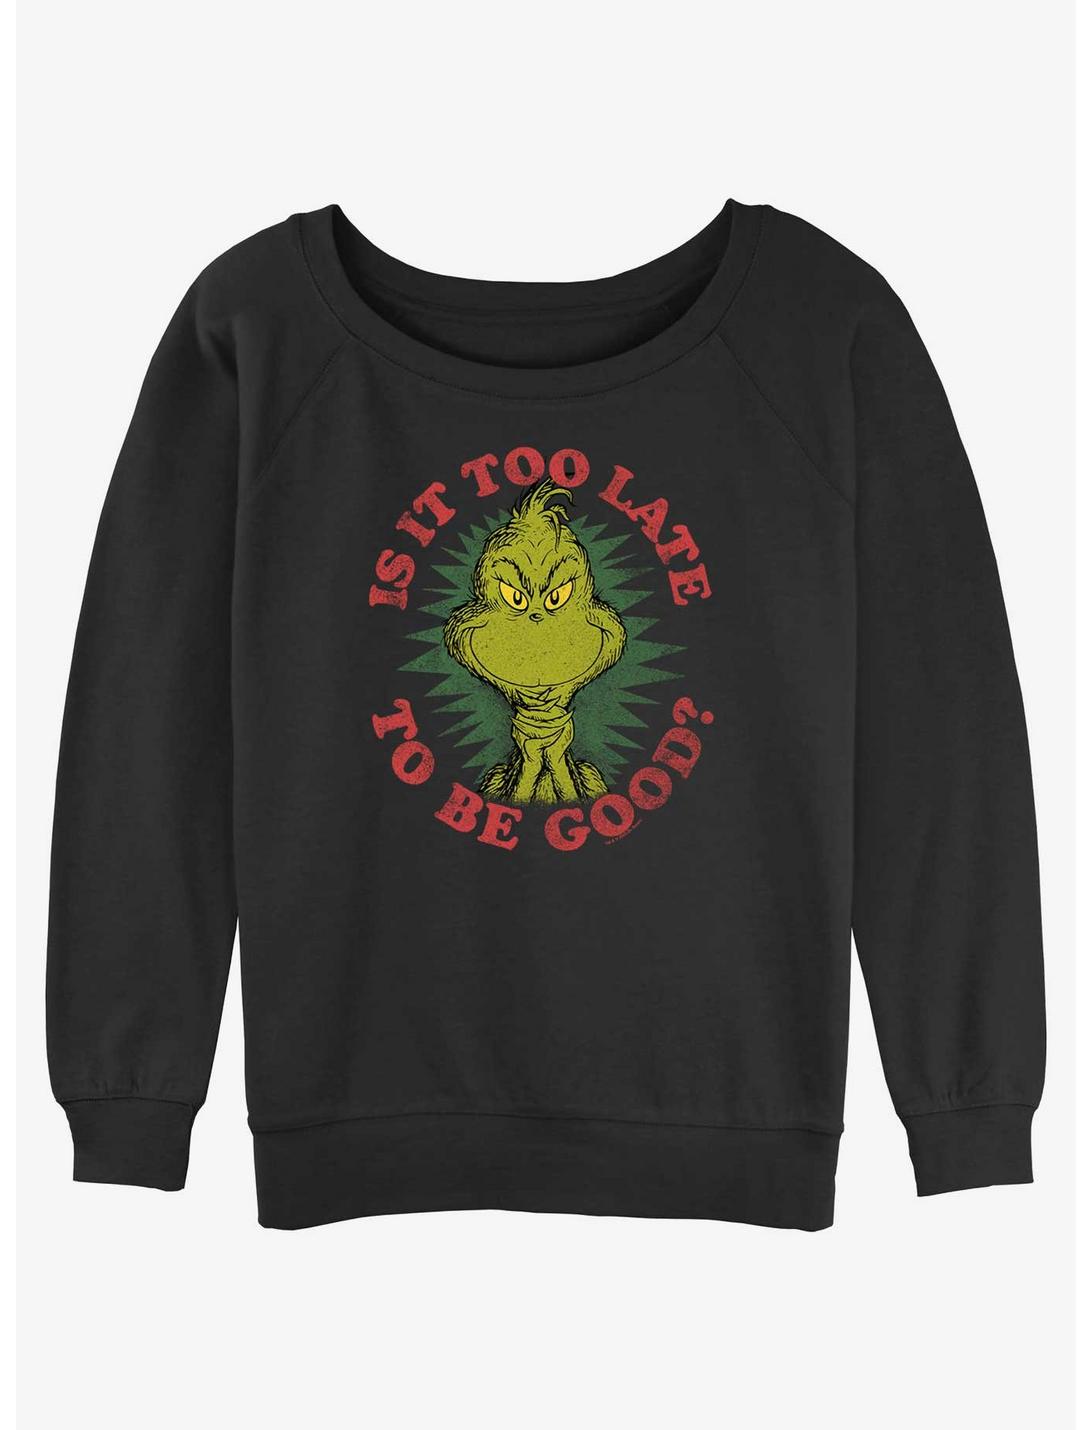 Dr. Seuss Grinch Is It Too Late To Be Good Girls Slouchy Sweatshirt, BLACK, hi-res